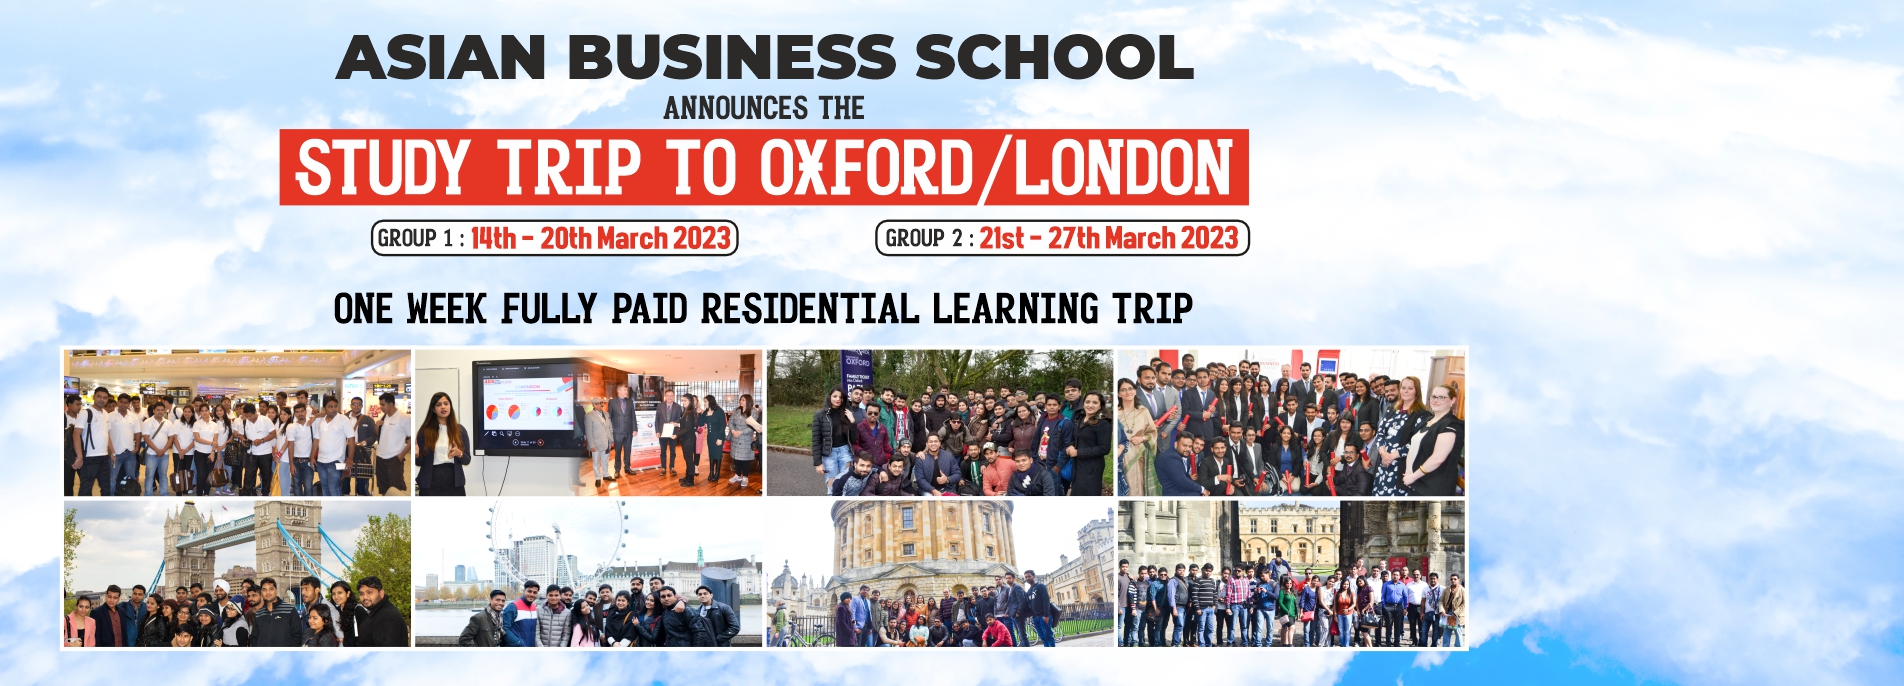 ABS-OXFORD-STUDENTS VISIT - 2023